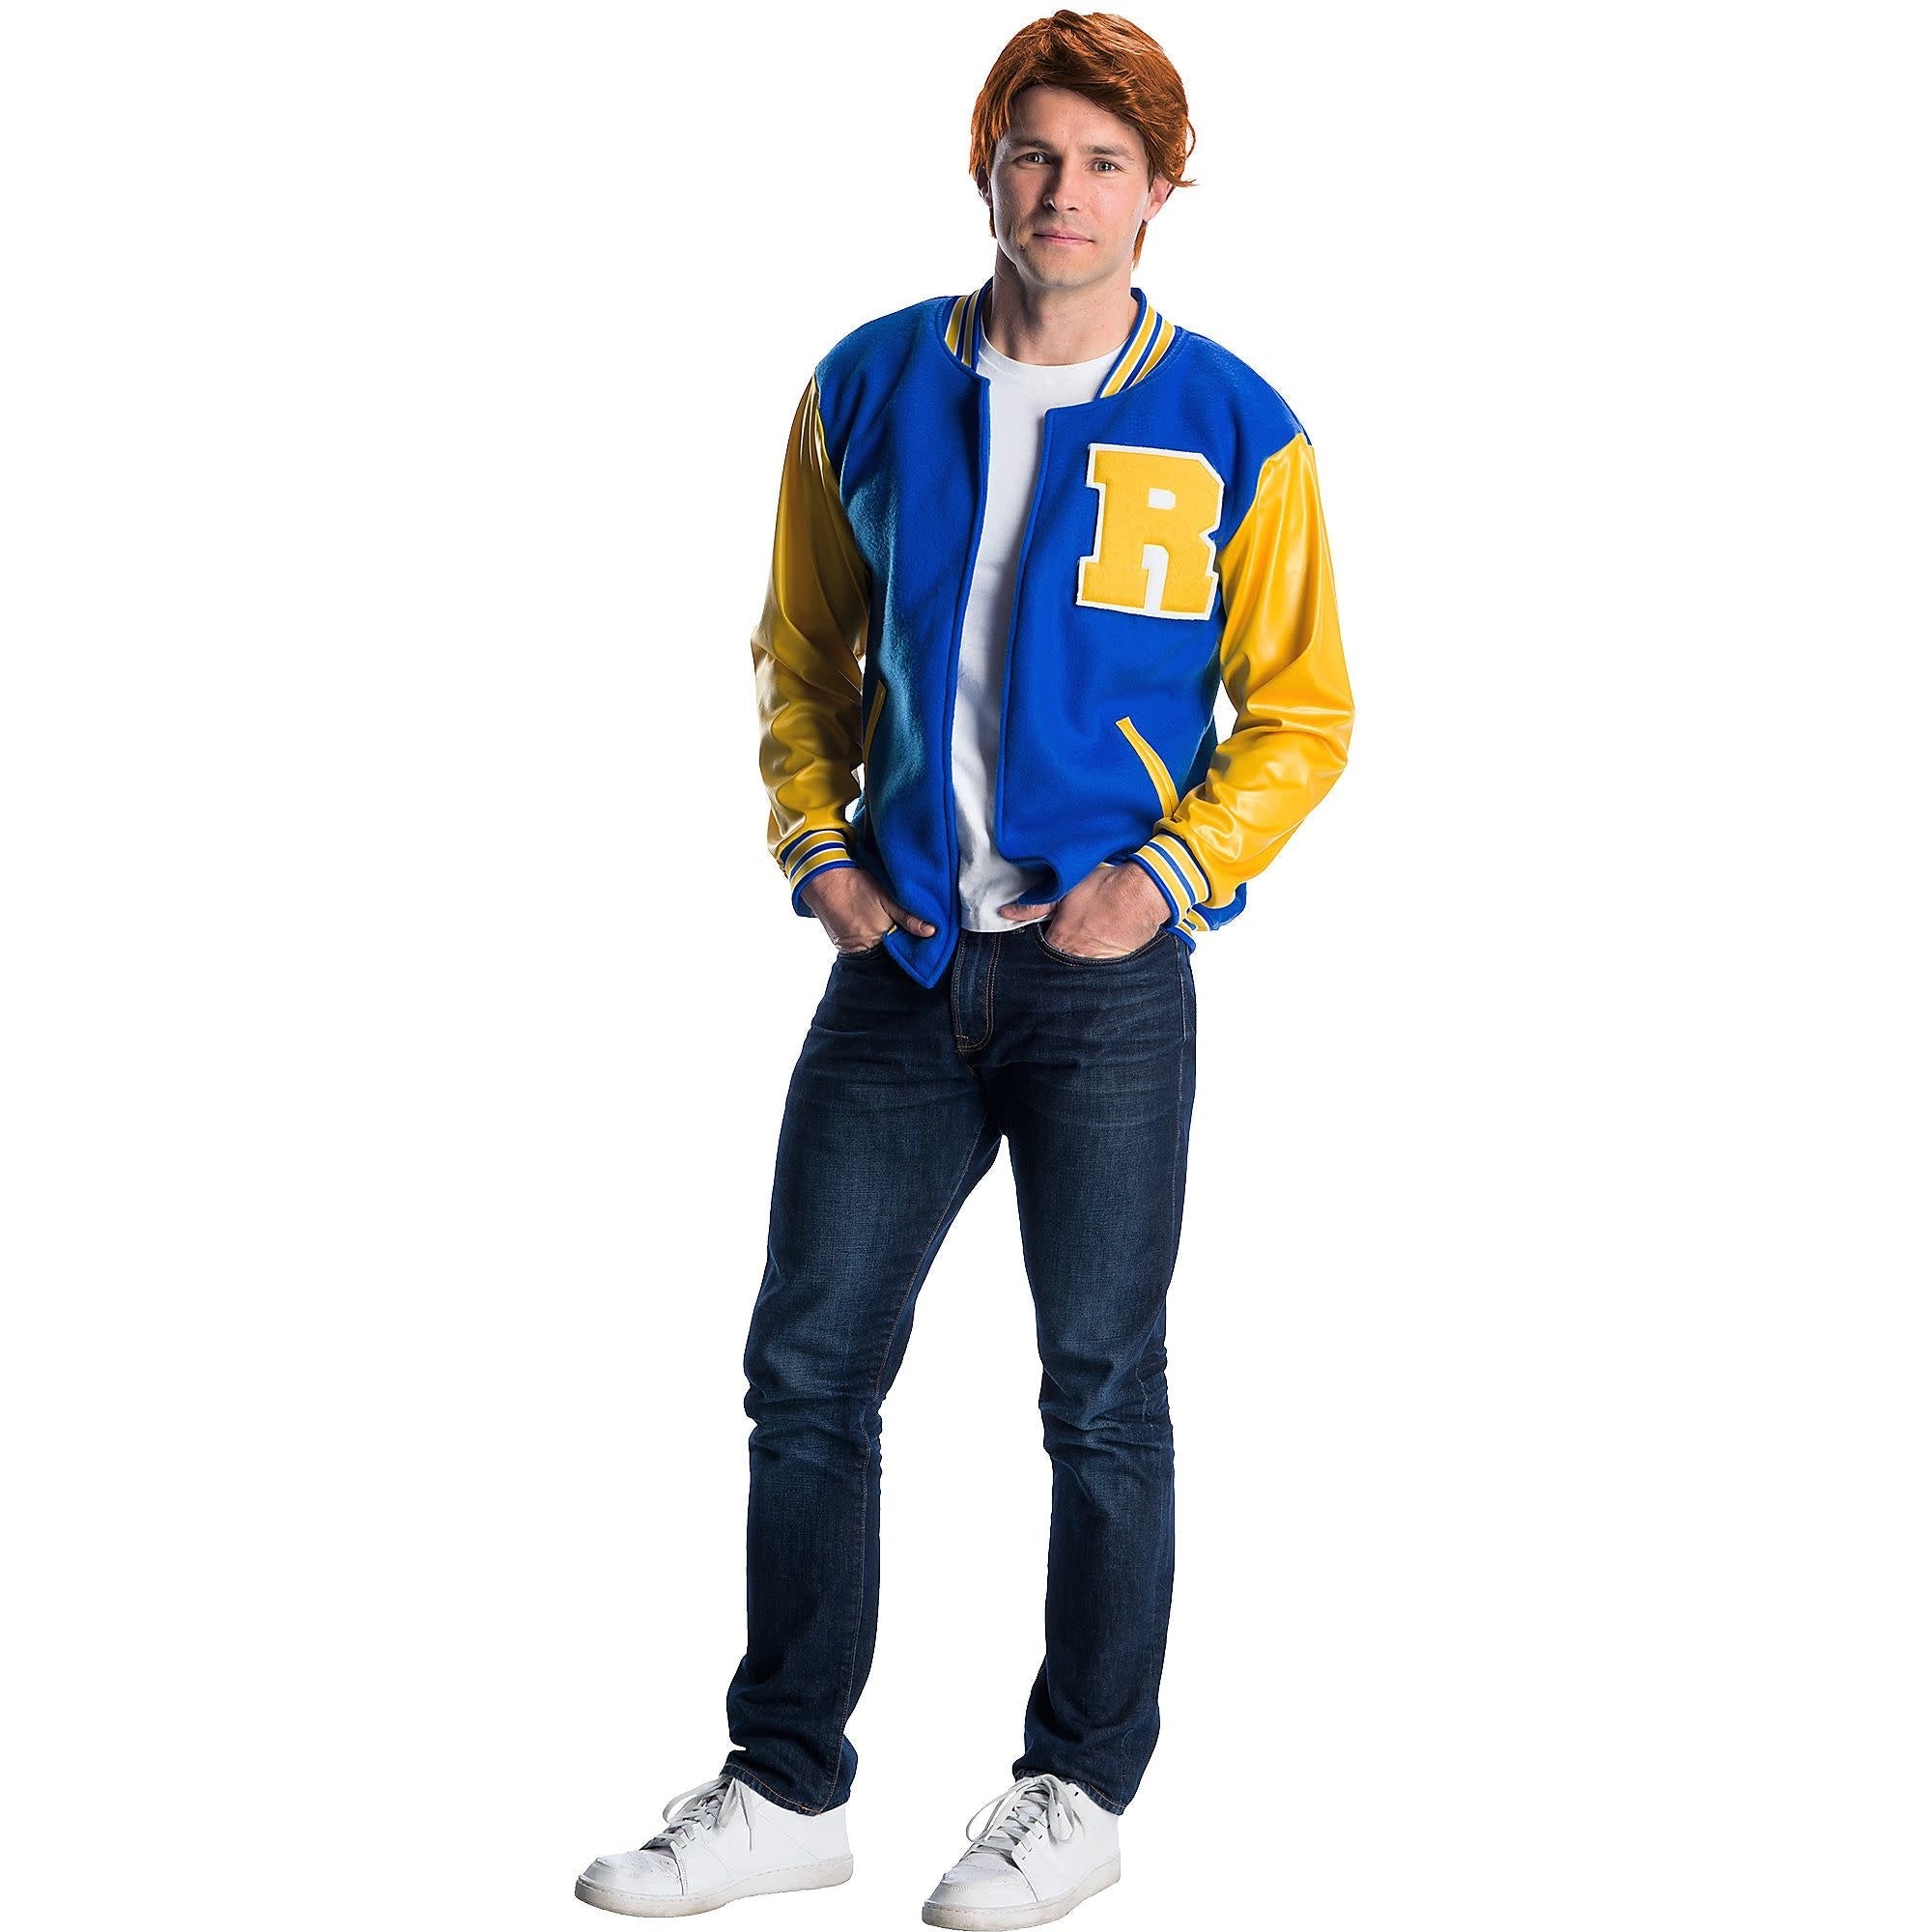 Costume Adulte - Archie Andrews - RiverdaleParty Shop